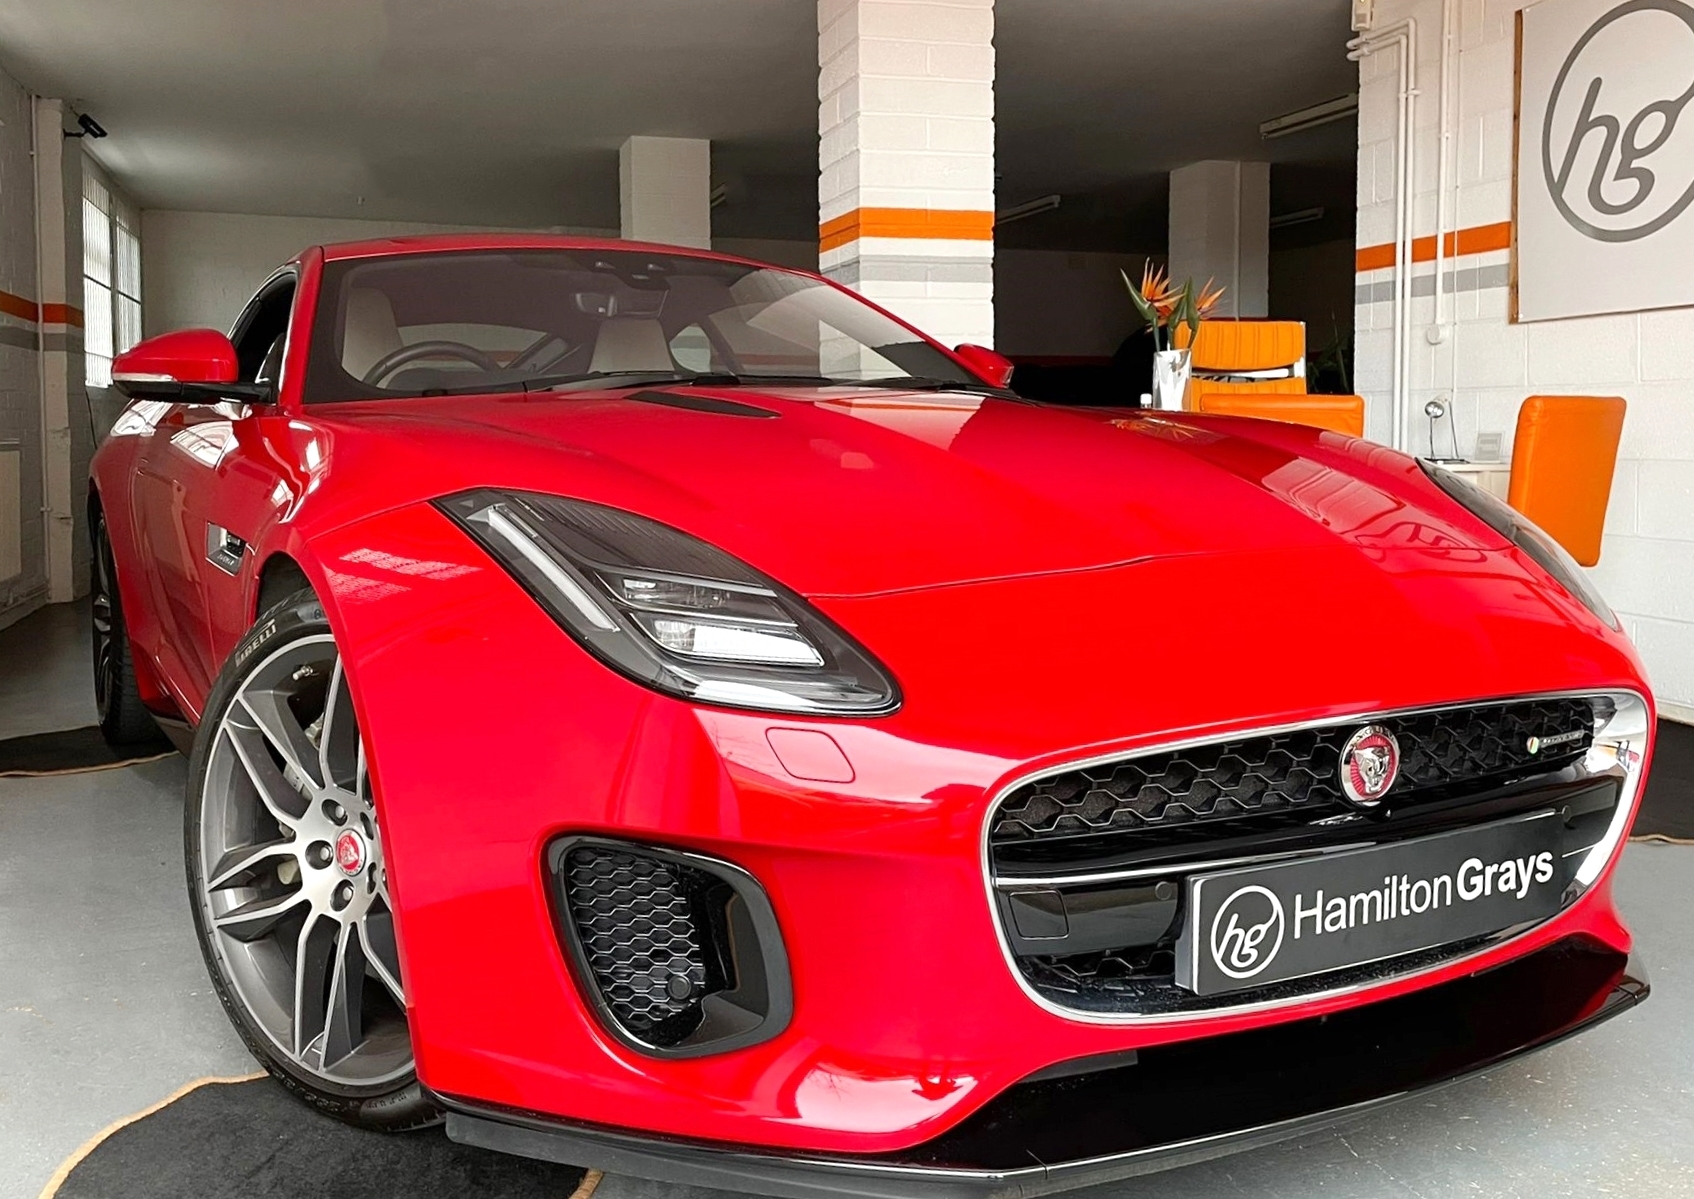 2020 (69) Jaguar F Type 2.0i [300] R-Dynamic Auto. In Solid Caldera Red with Full Ivory Leather. FSH.. 16k. Serviced and MOT by Jaguar 03.01.23 Sports Exhaust System.. A Striking Car.  (SOLD)